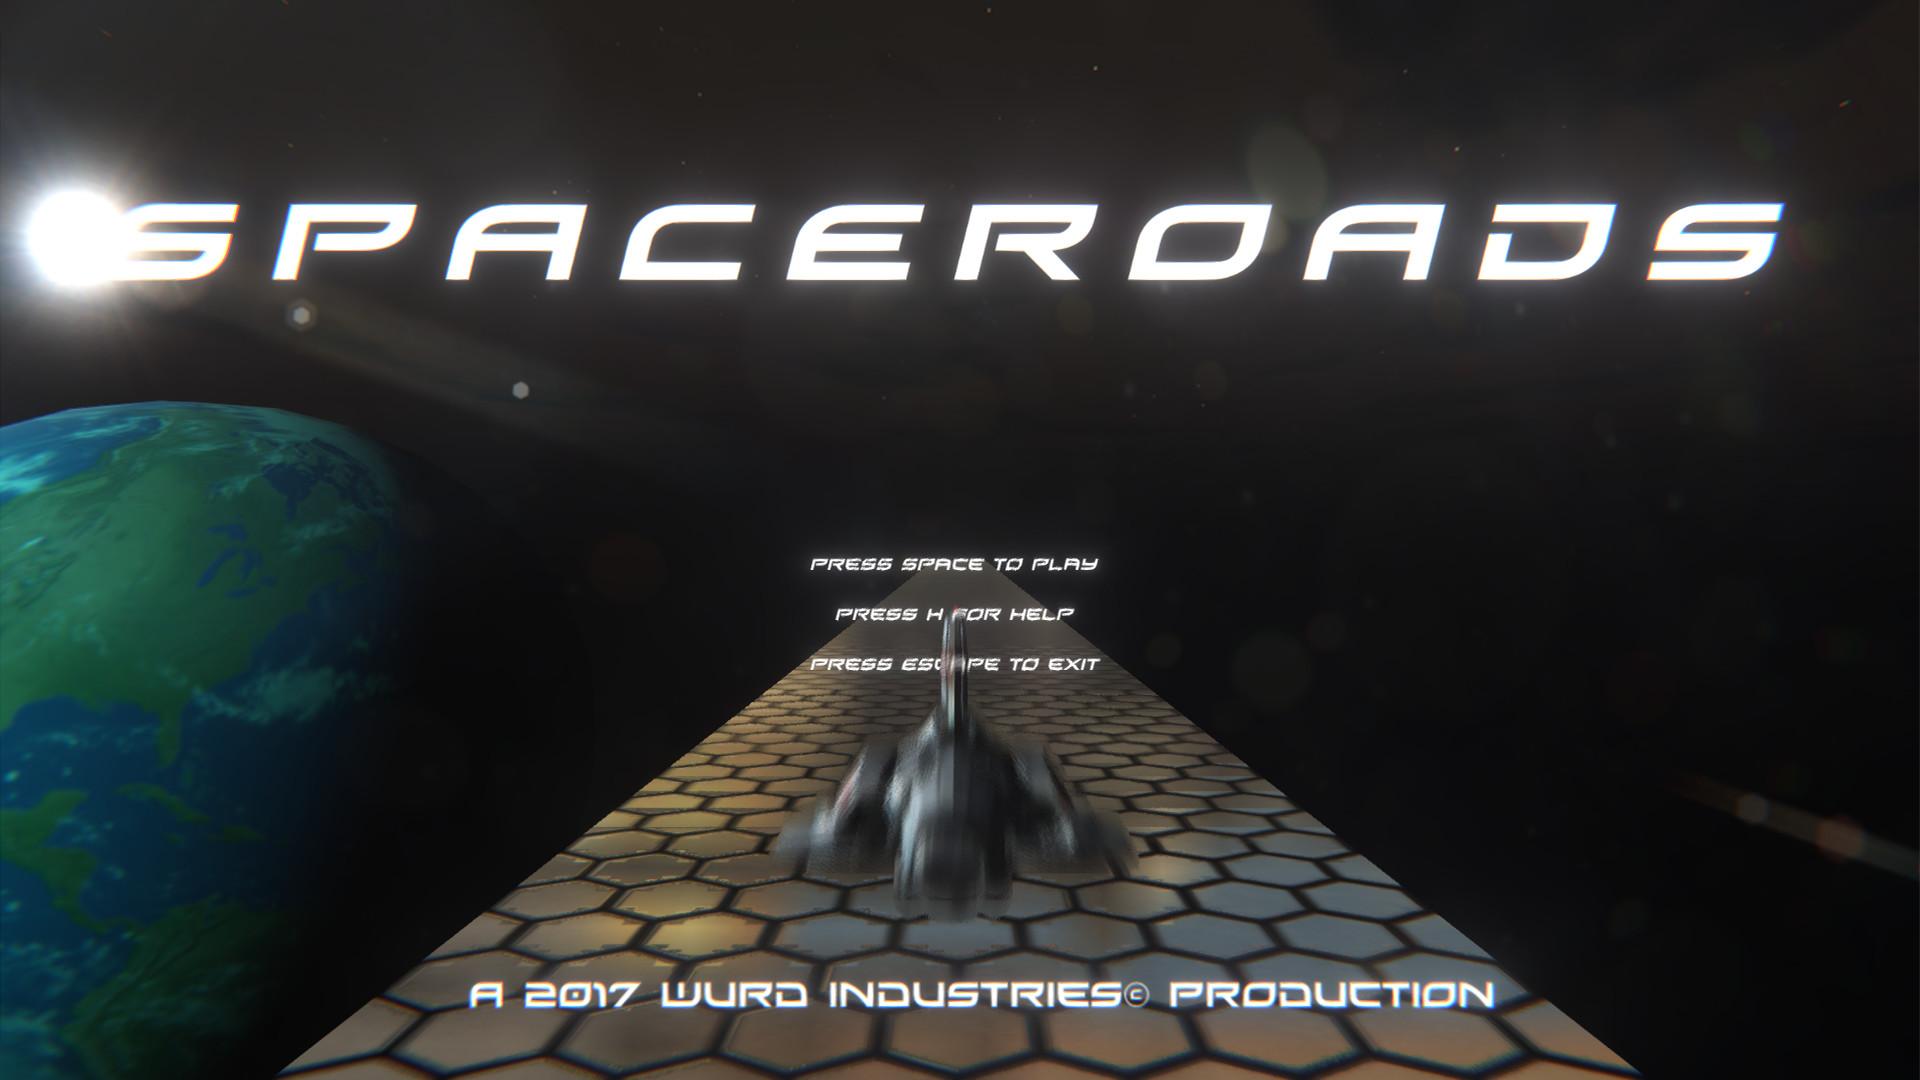 Screenshot №1 from game SpaceRoads